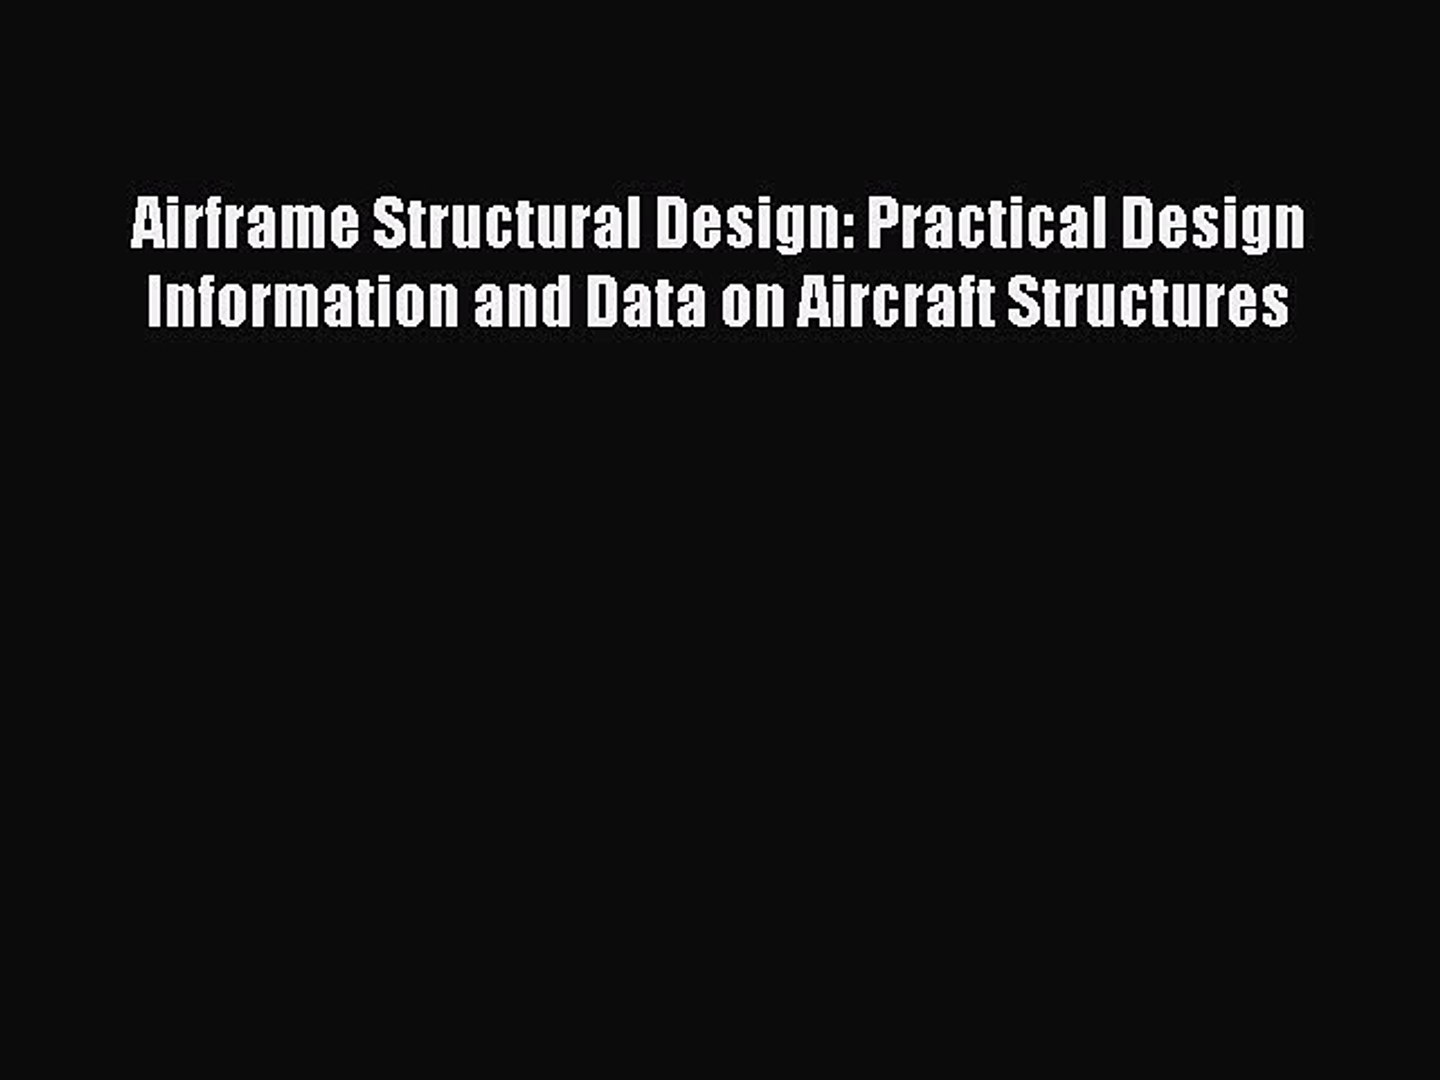 [Download] Airframe Structural Design: Practical Design Information and Data on Aircraft Structures